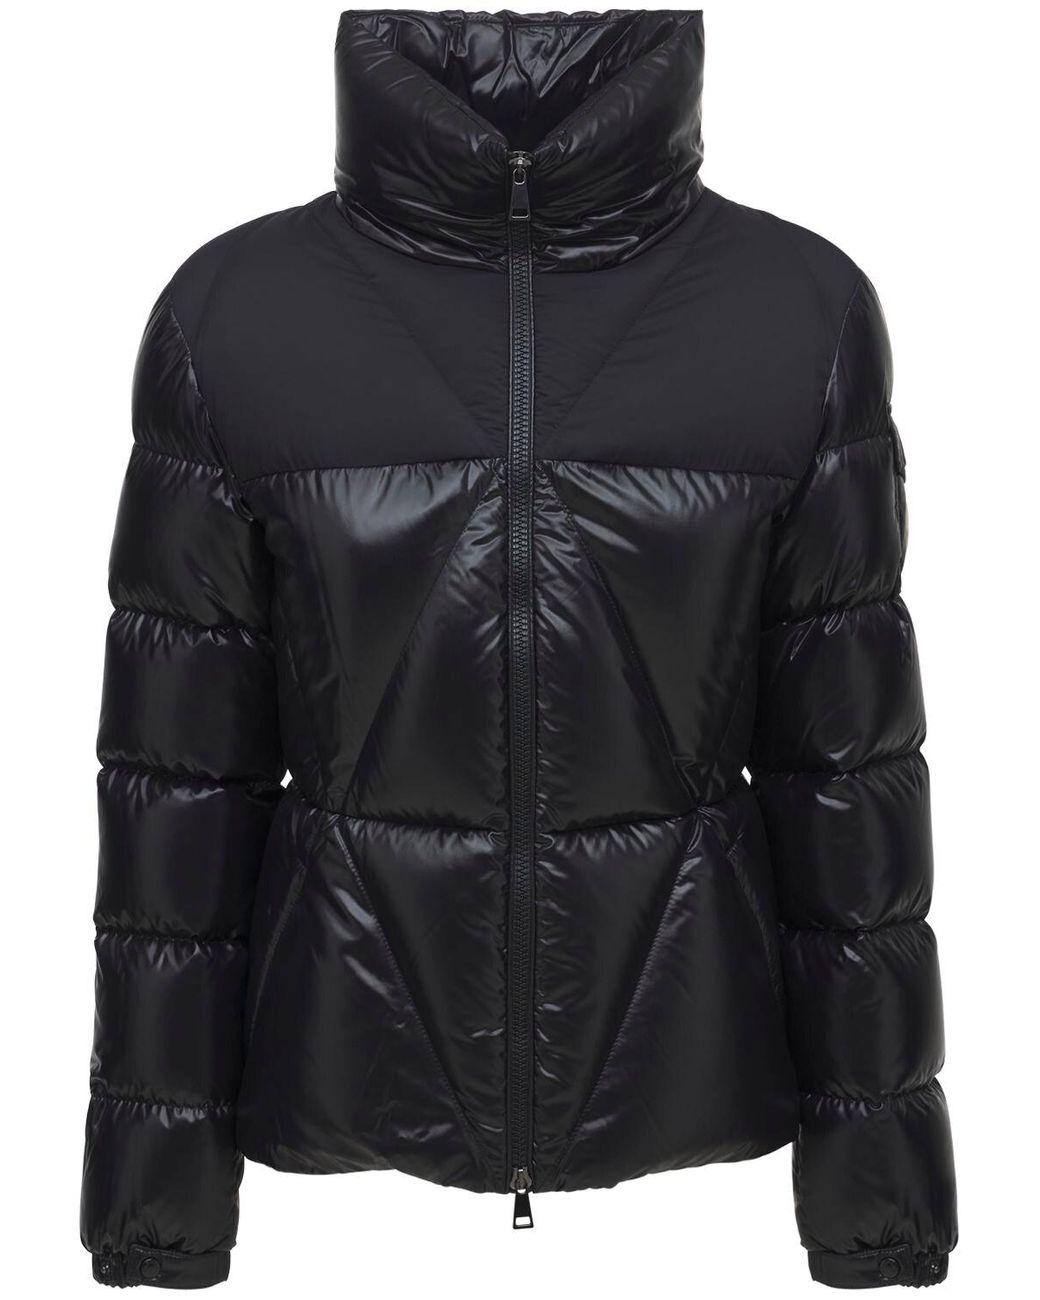 moncler wet look jacket,OFF 78%,www.concordehotels.com.tr